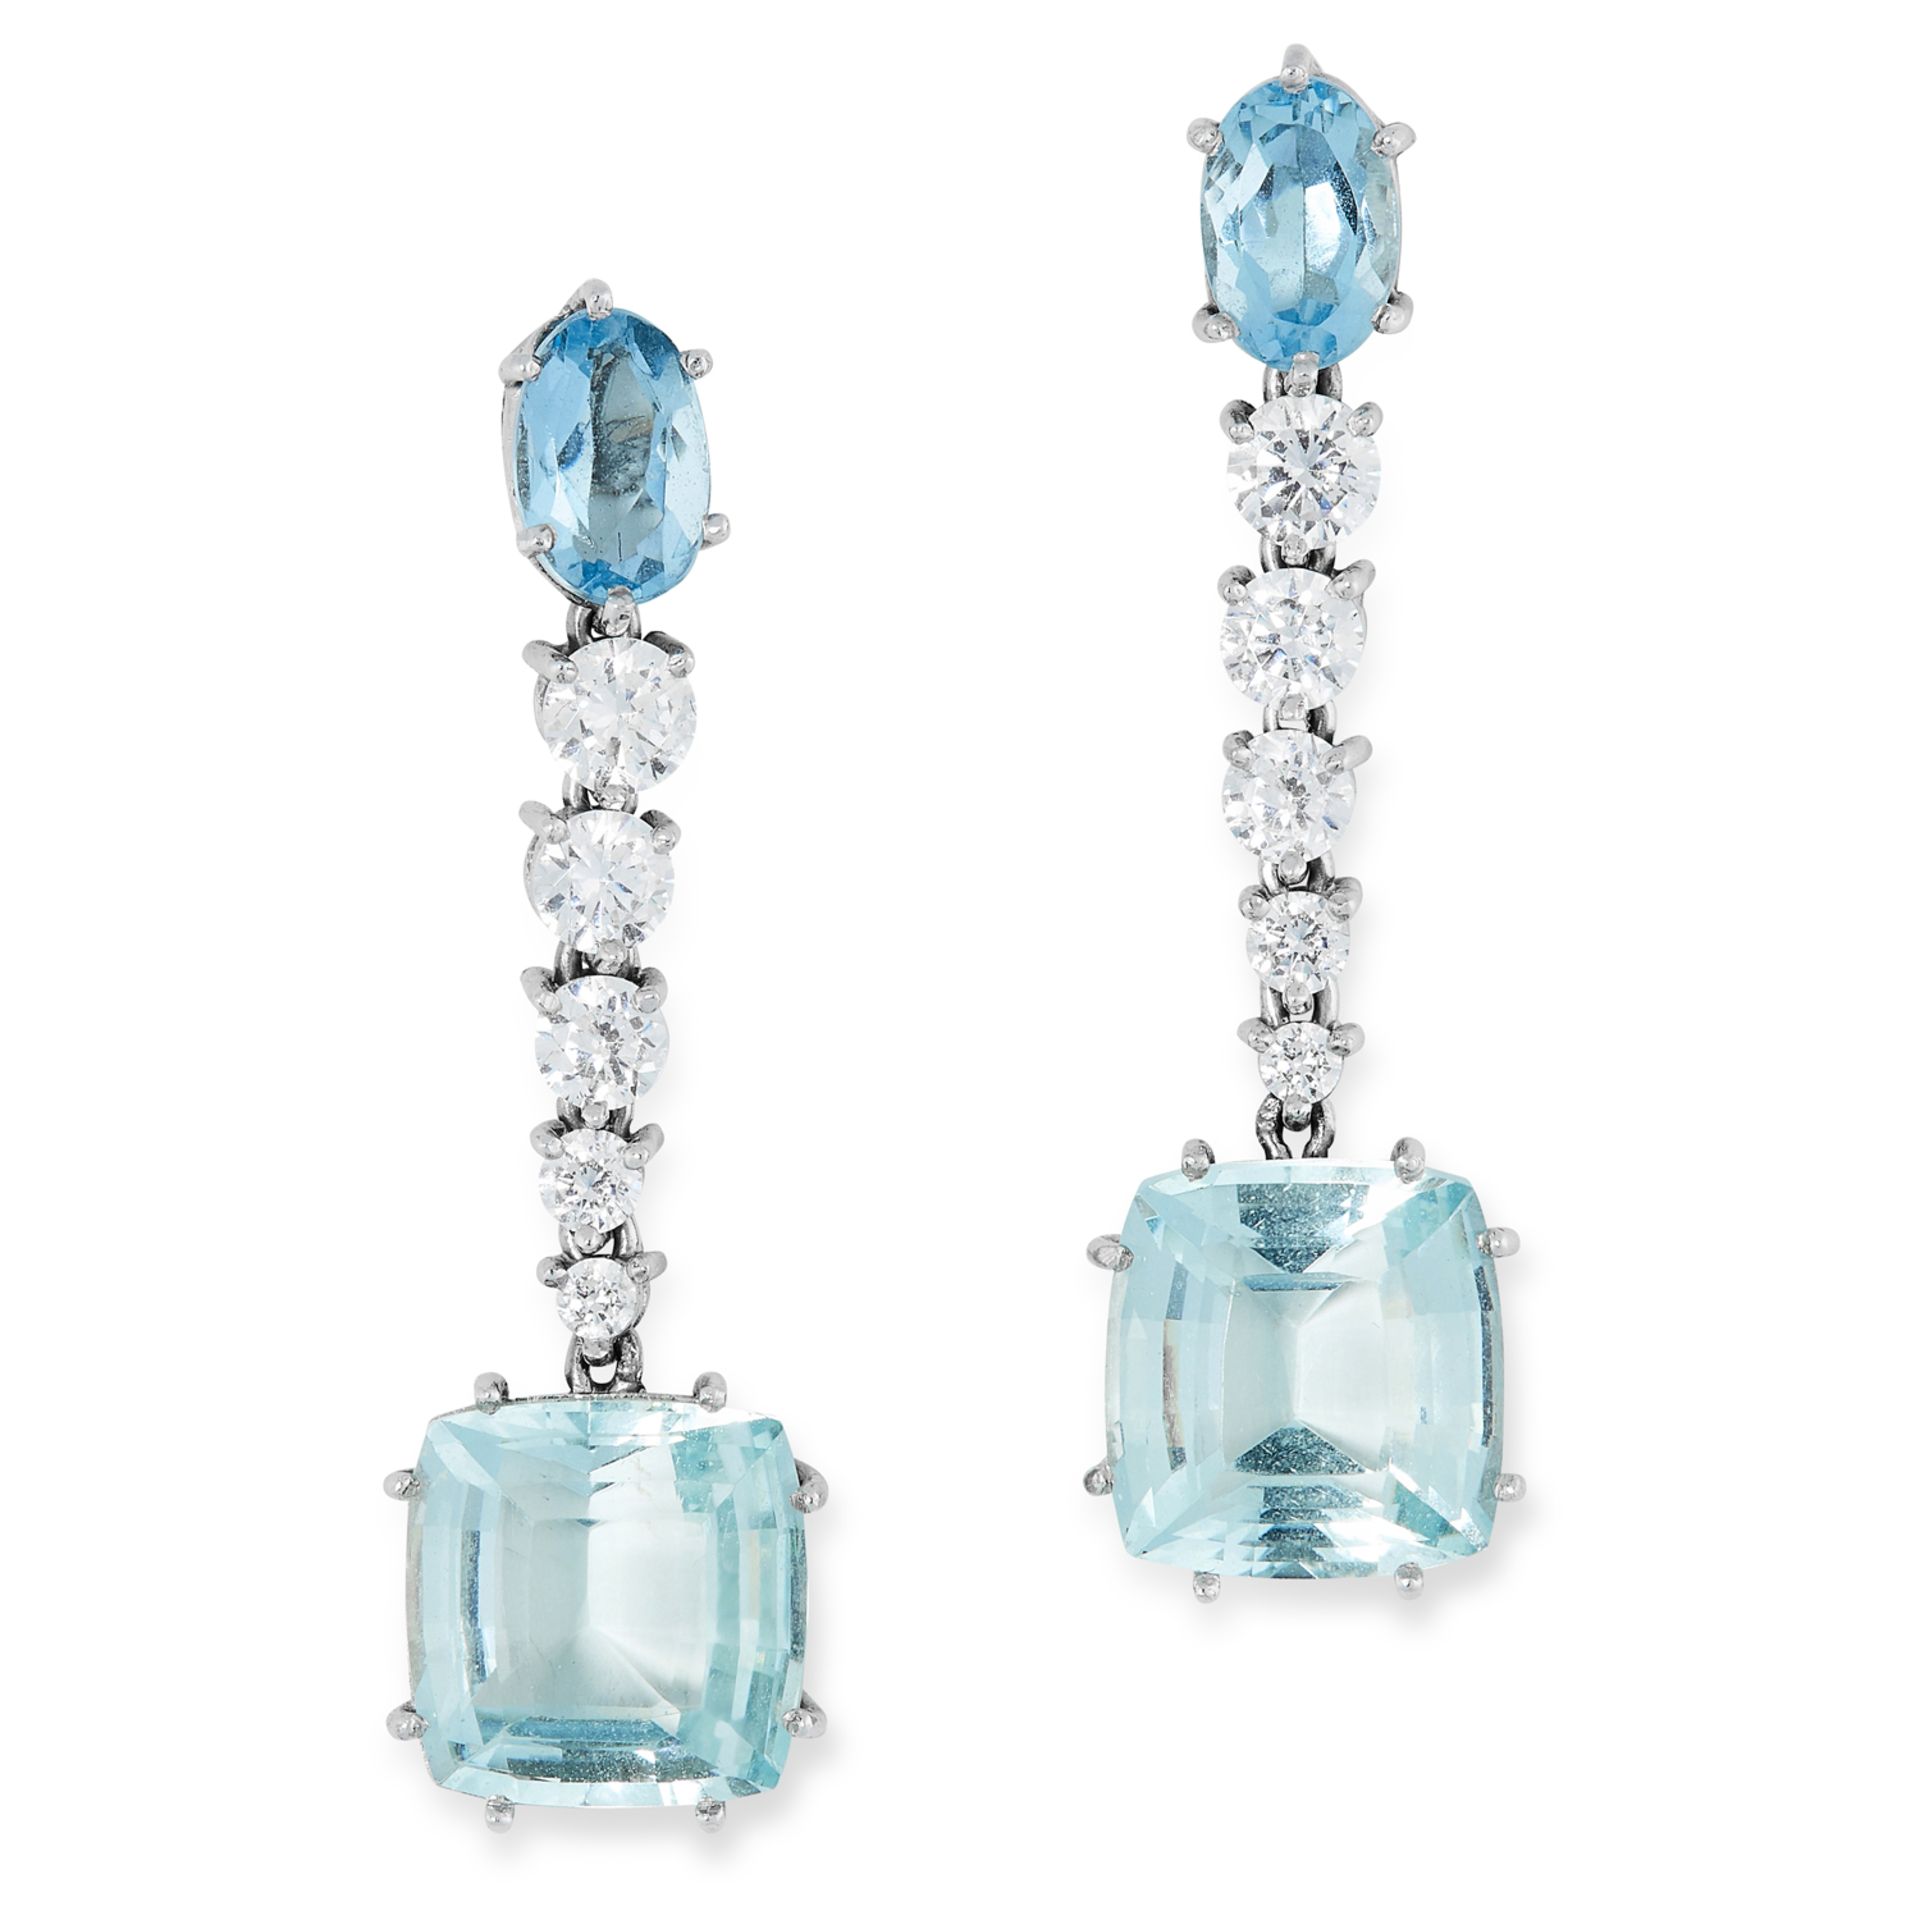 A PAIR OF AQUAMARINE AND WHITE SAPPHIRE EARRINGS in 18ct white gold, each set with an oval cut